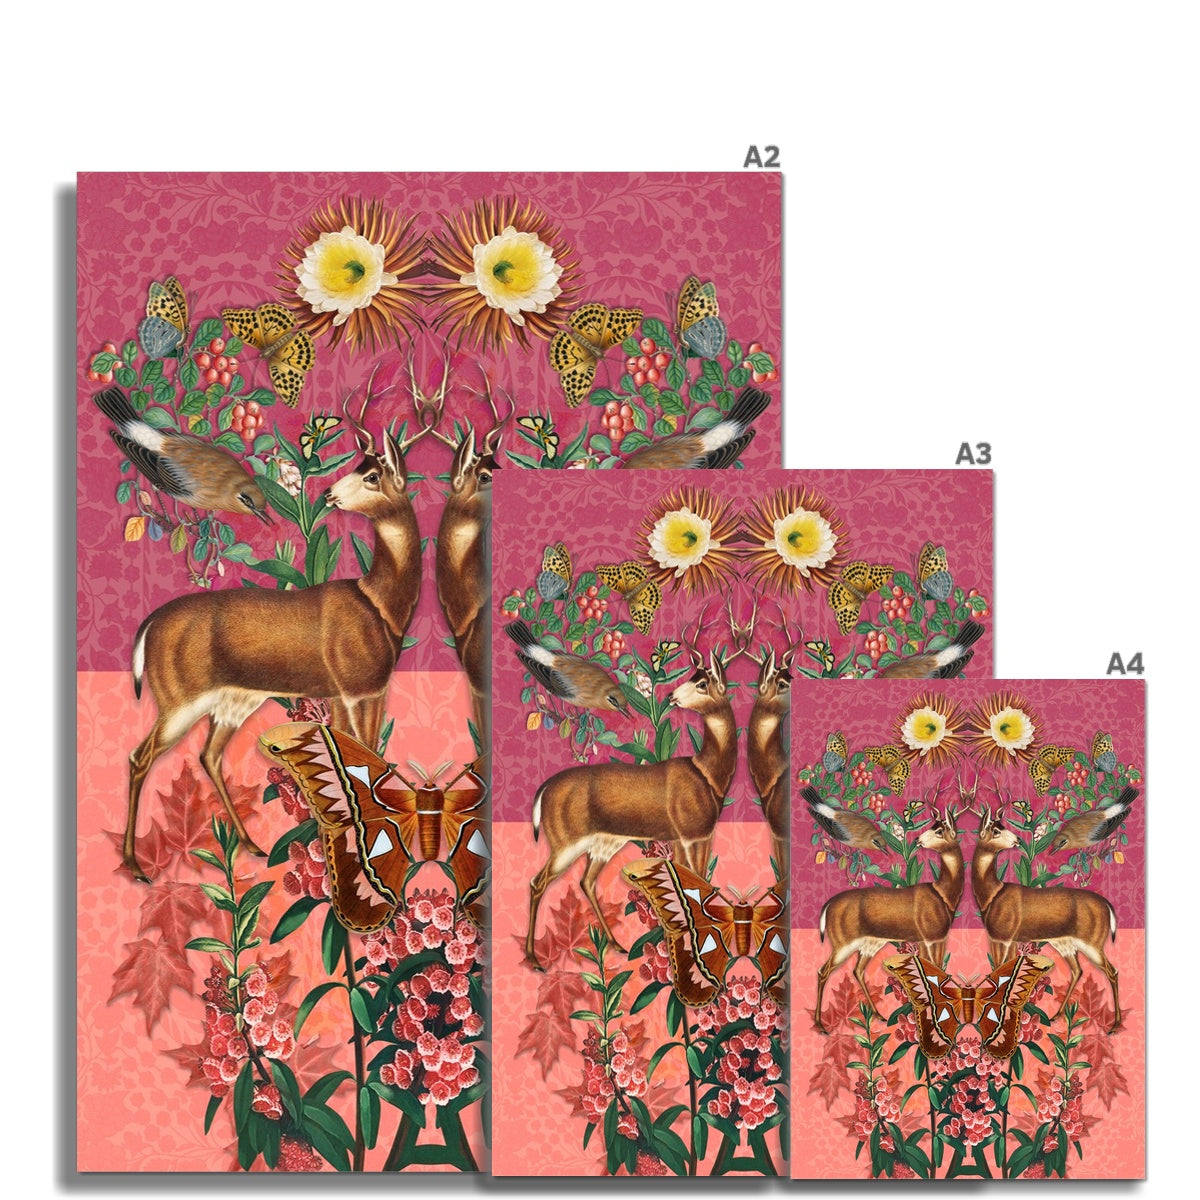 modeabode pink deer and butterflies print sizes A2,A3 and A4.